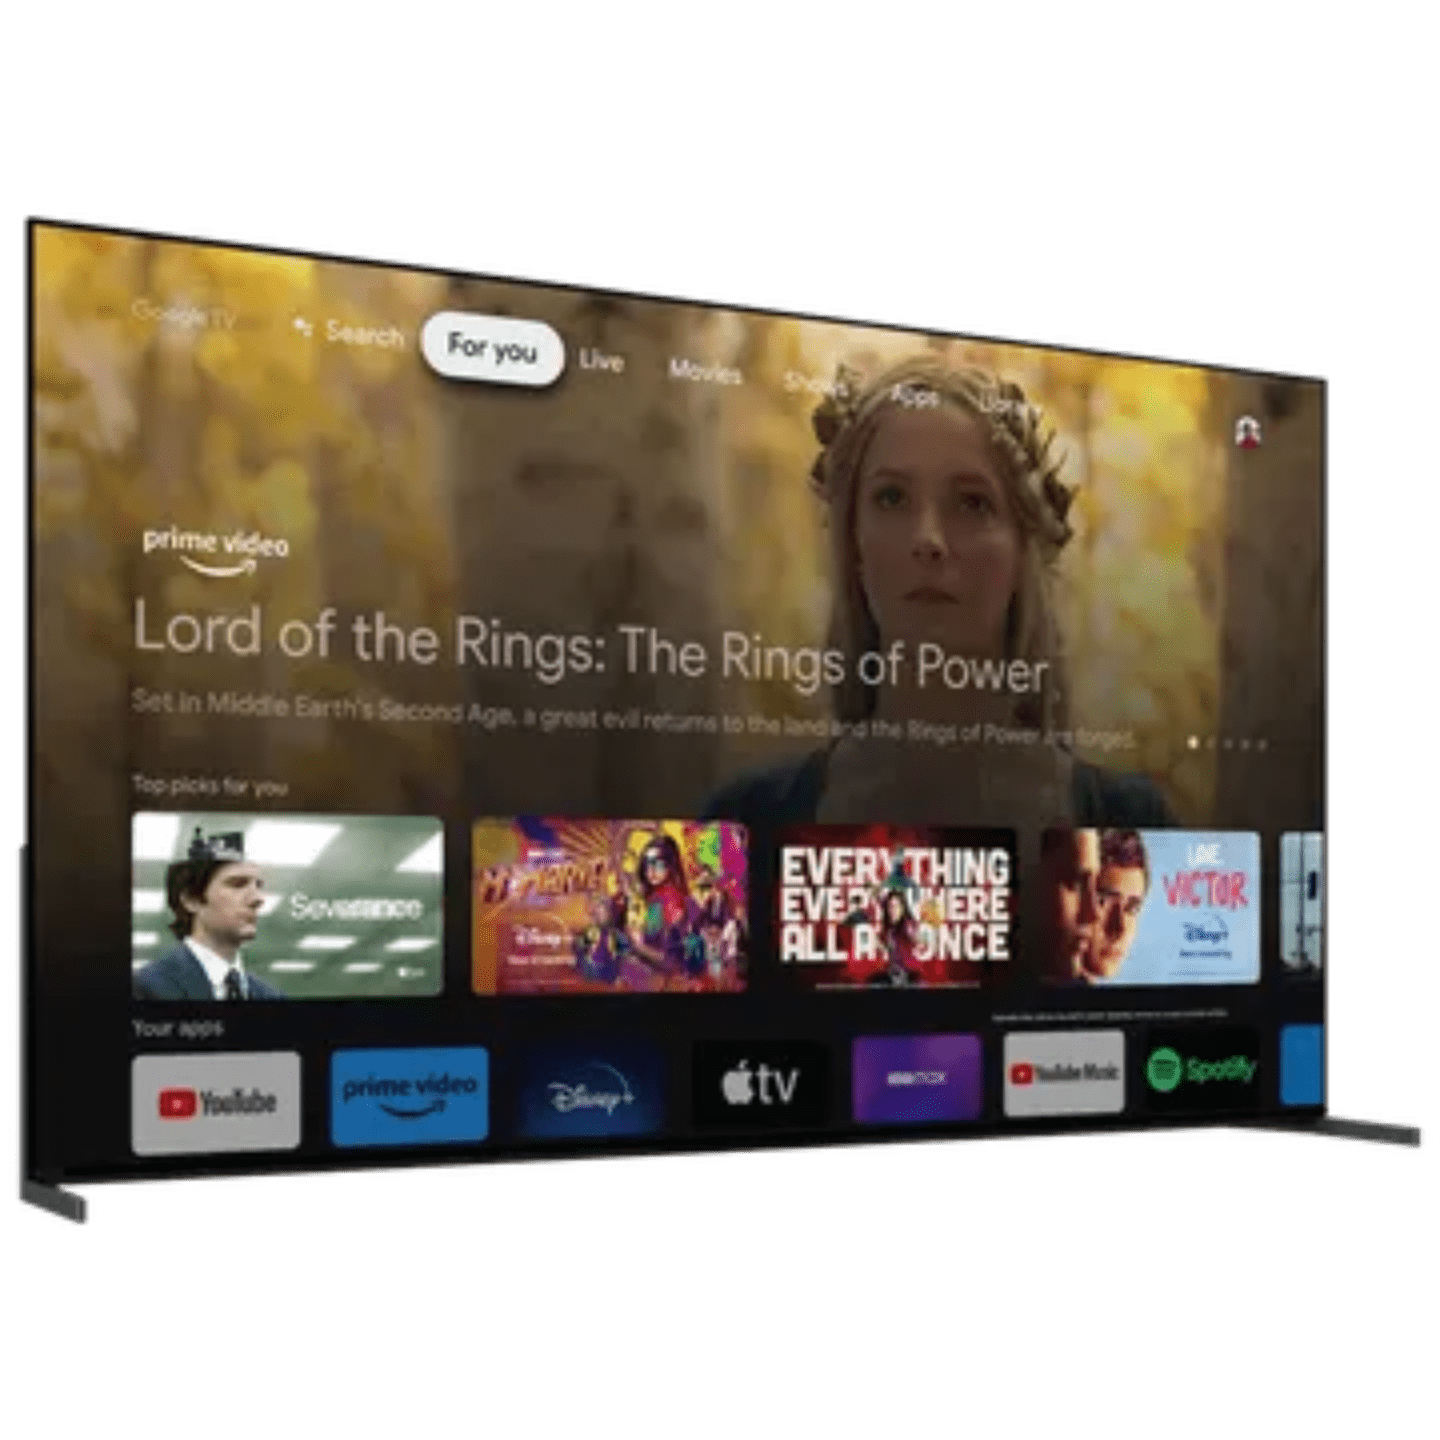 SONY A95L Series 164 cm (65 inch) OLED 4K Ultra HD Google TV with Dolby Vision and Dolby Atmos (2023 model)